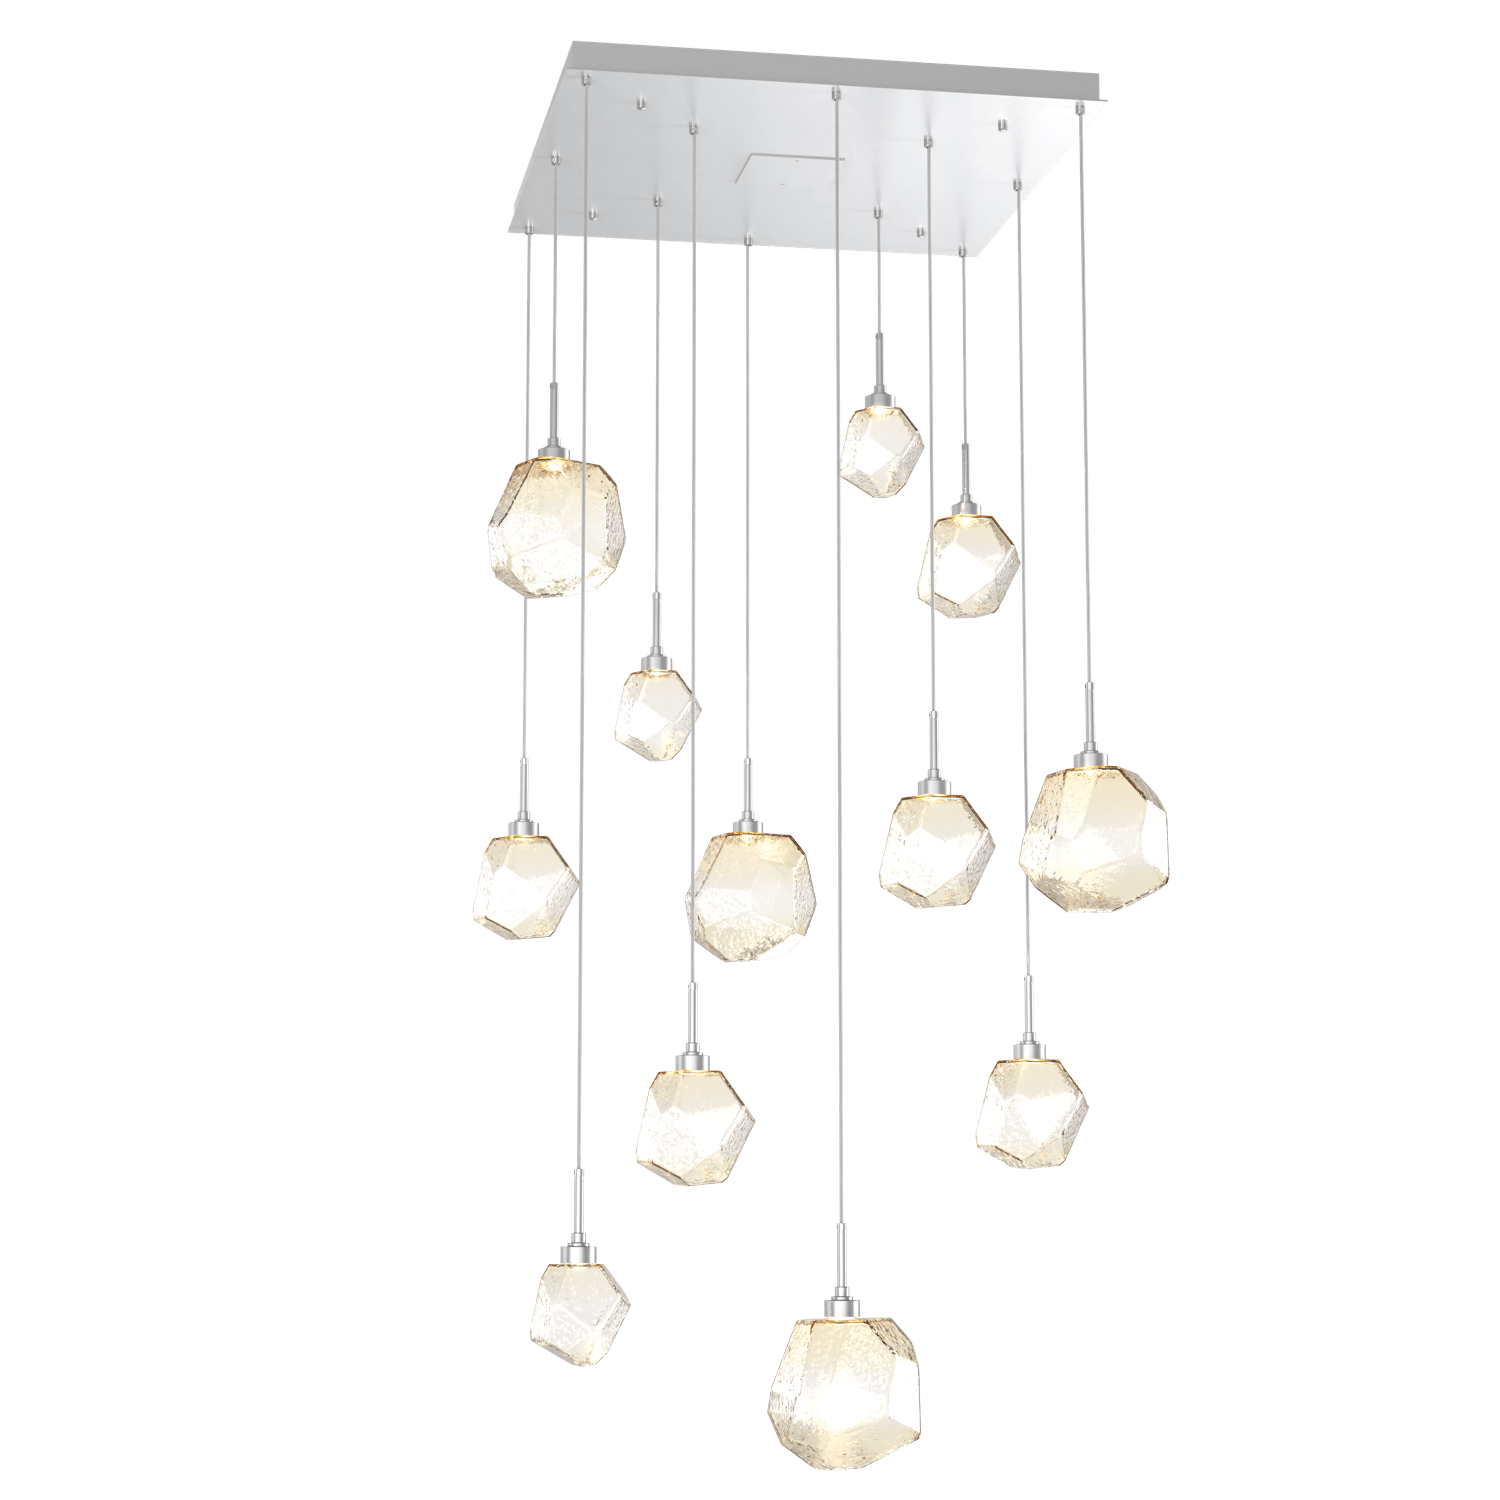 CHB0039-12-CS-A-Hammerton-Studio-Gem-12-light-square-pendant-chandelier-with-classic-silver-finish-and-amber-blown-glass-shades-and-LED-lamping